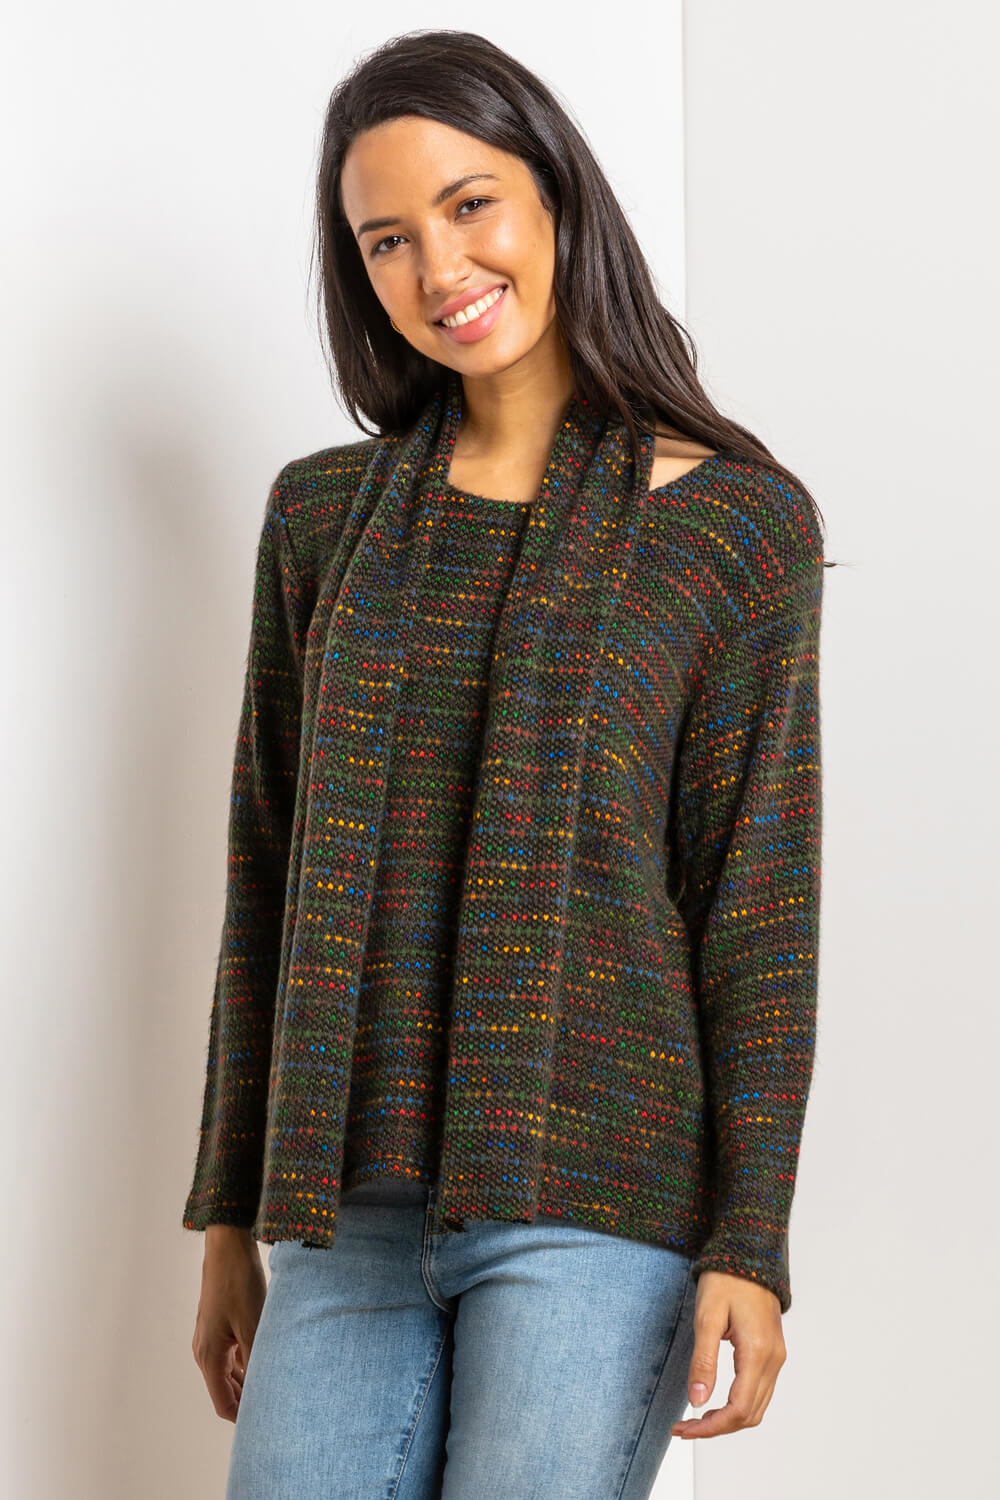 Textured Yarn Top with Scarf